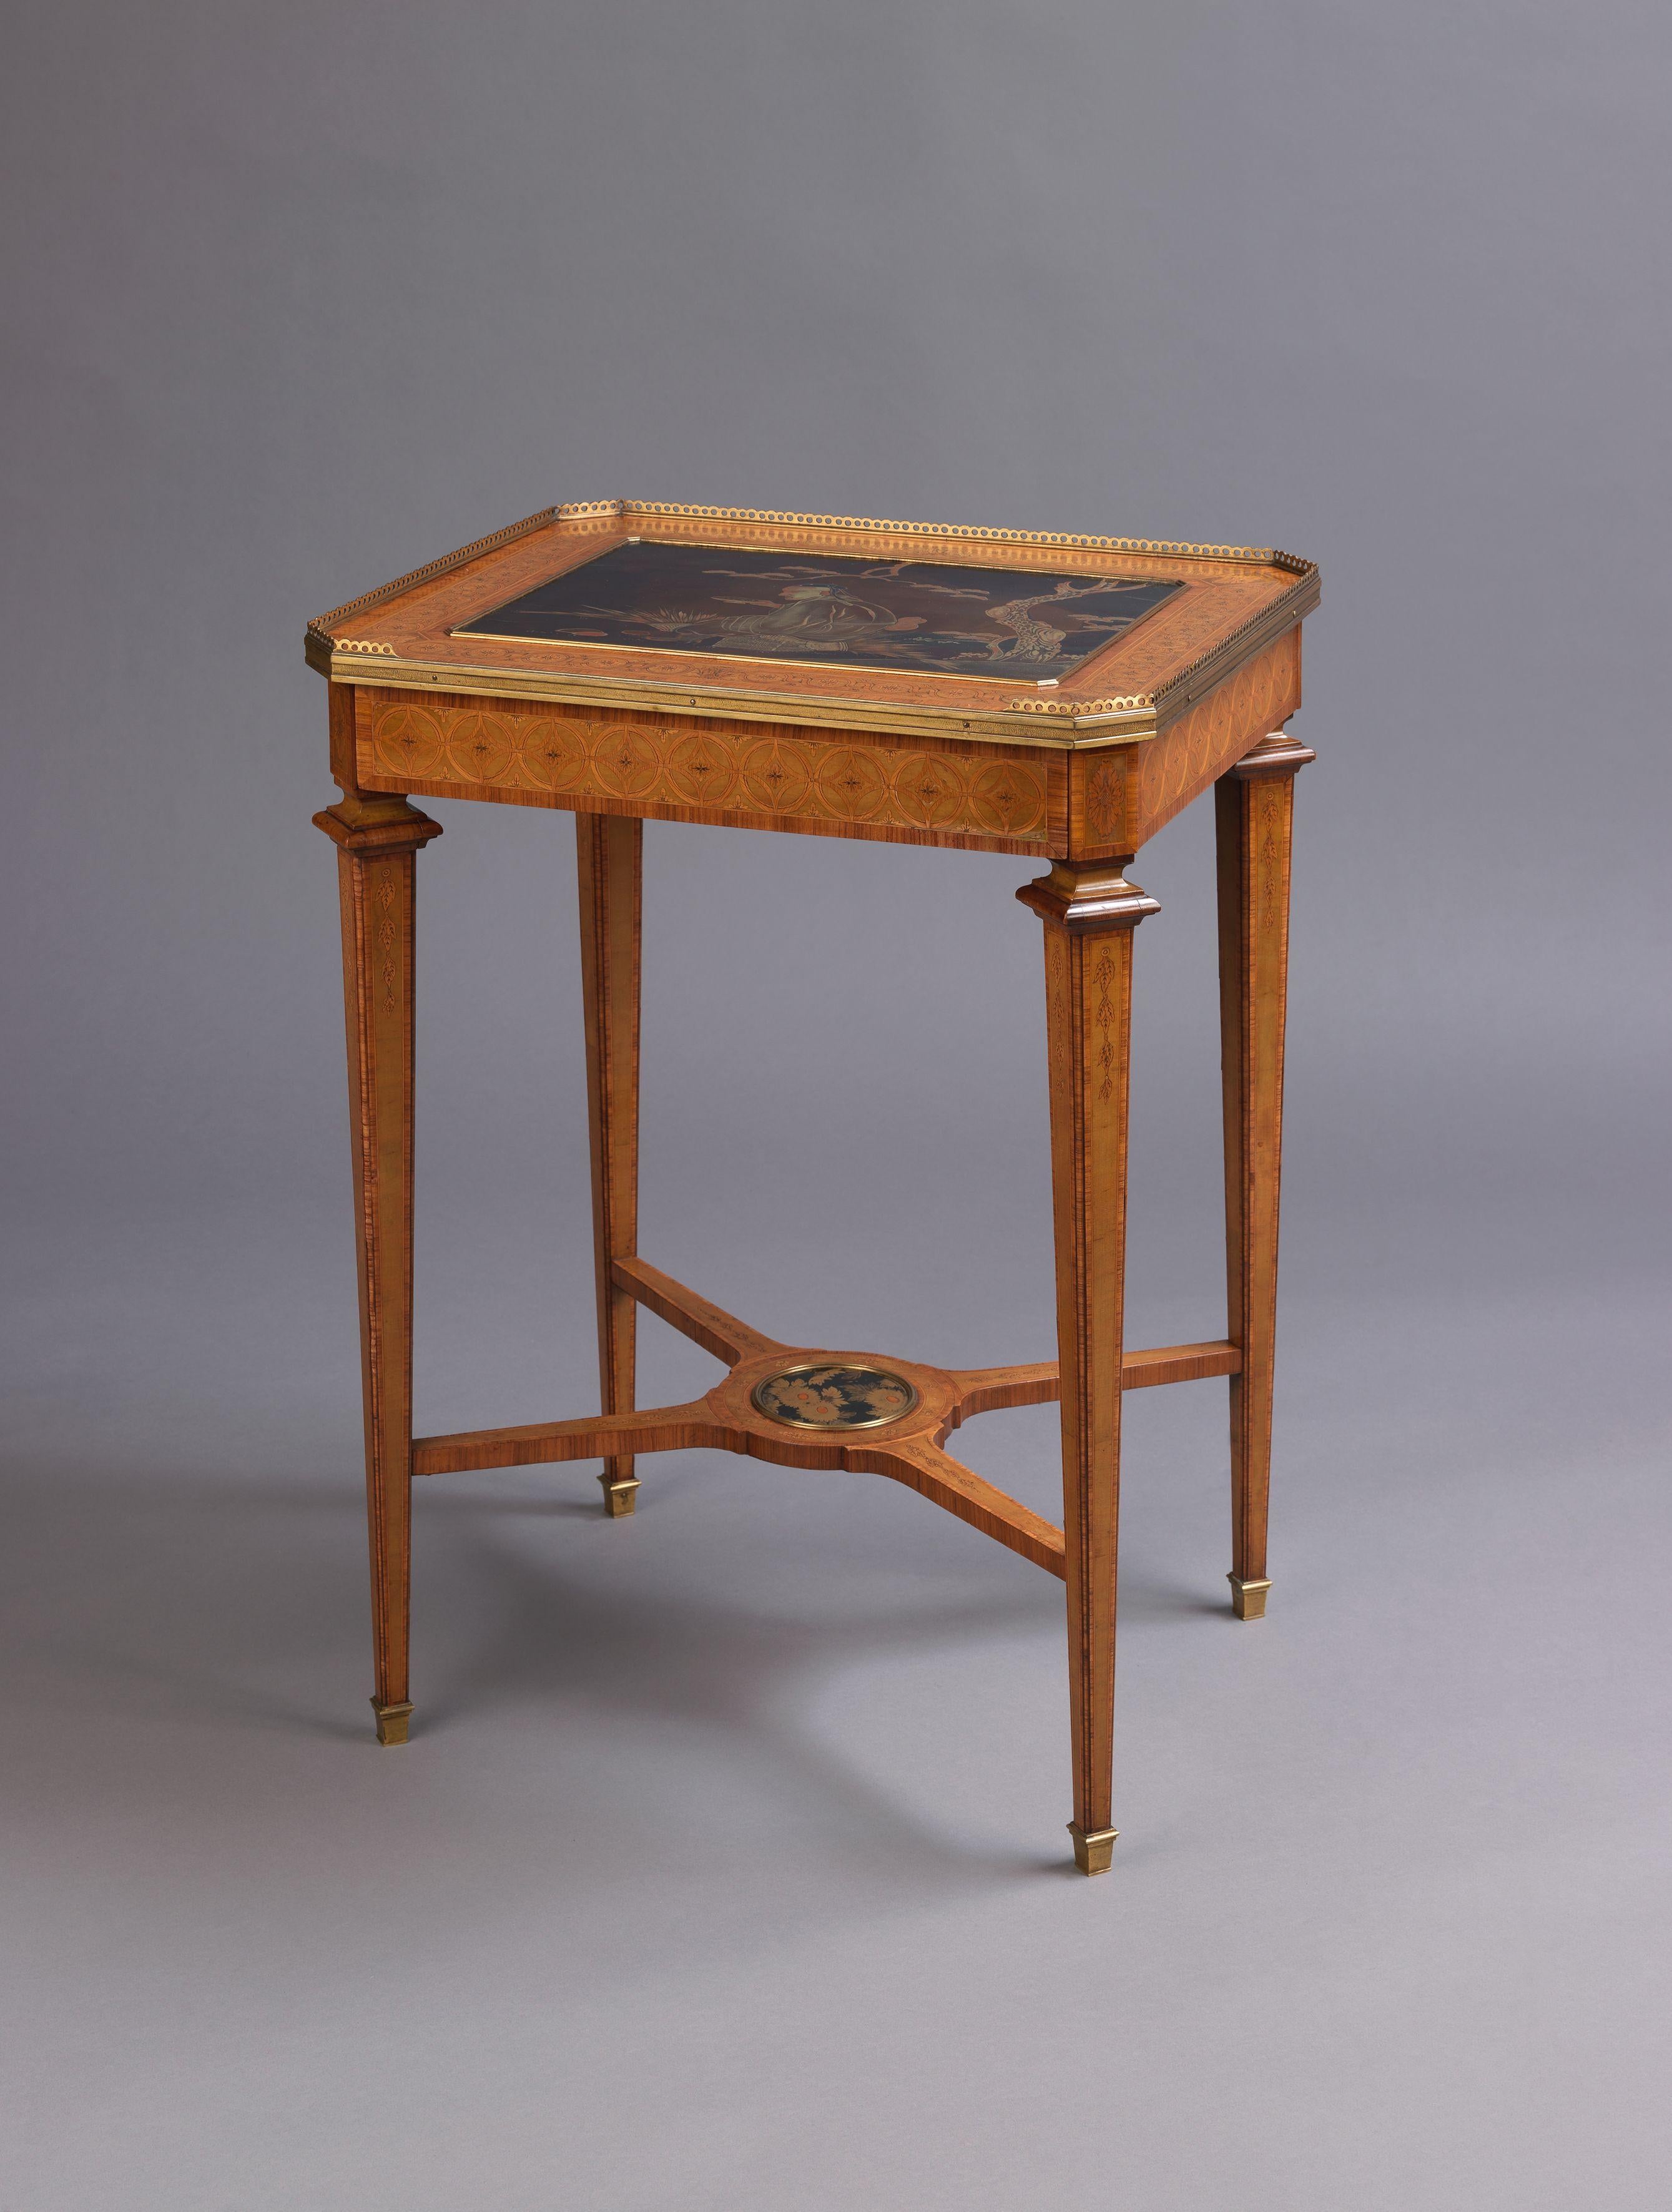 A fine marquetry inlaid table with a lacquer top, retailed by Boin Taburet. 

French, circa 1880. 

Stamped to the underside ‘Boin Taburet’. 

This attractive and unusual small occasional table is finely inlaid with a guilloché running pattern